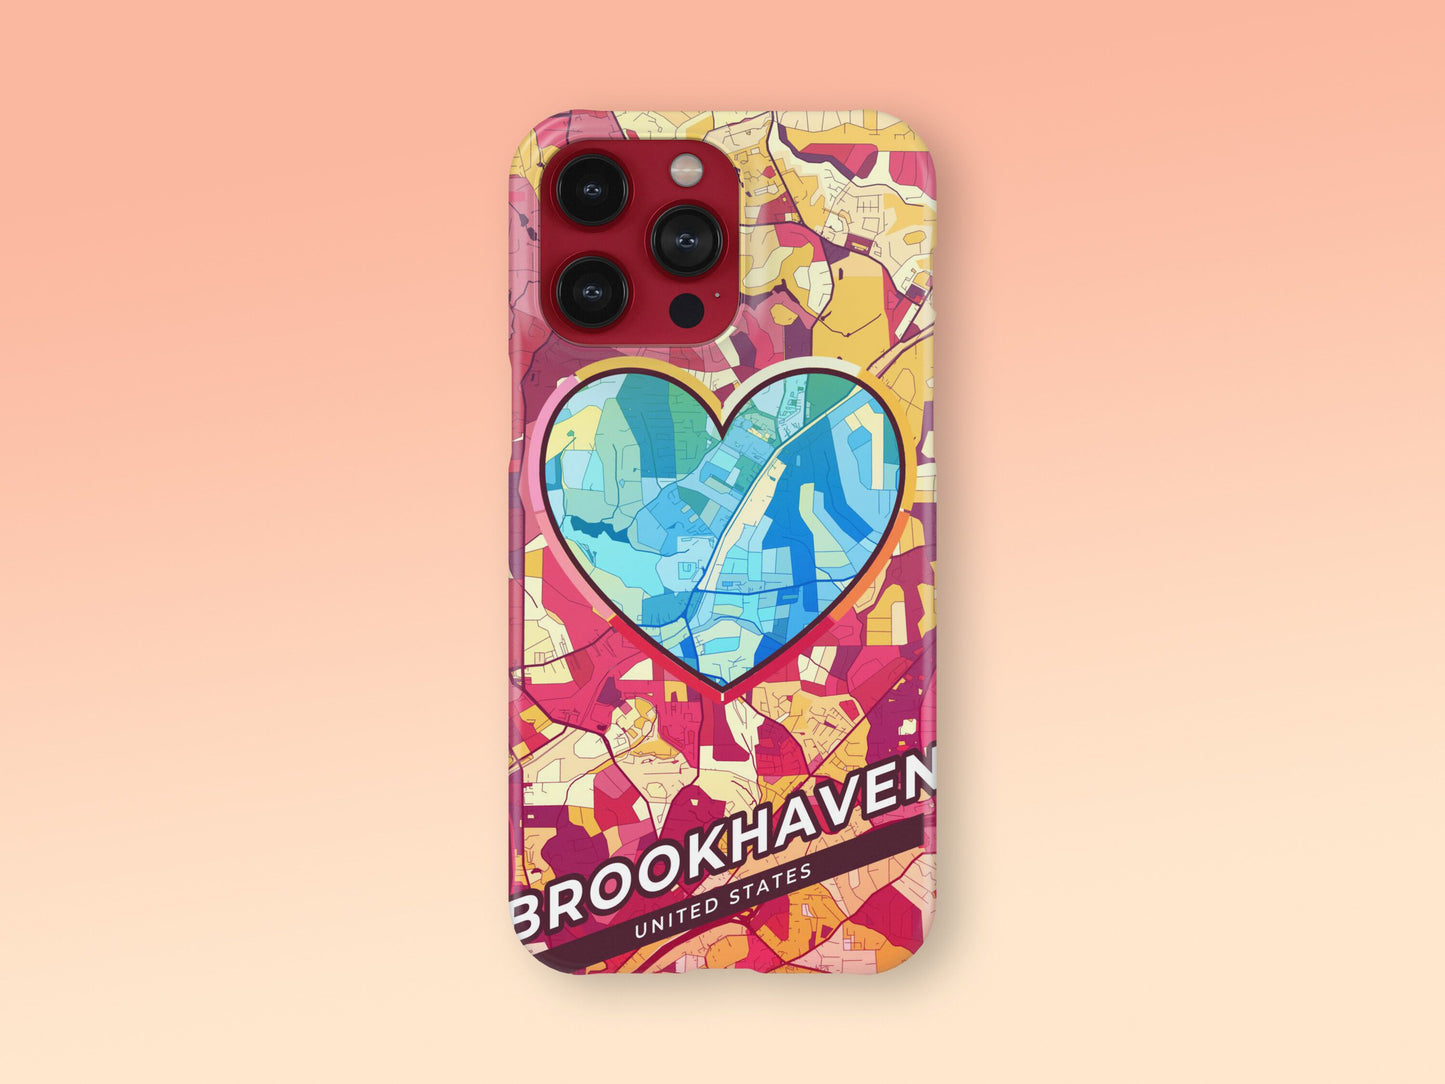 Brookhaven Georgia slim phone case with colorful icon. Birthday, wedding or housewarming gift. Couple match cases. 2